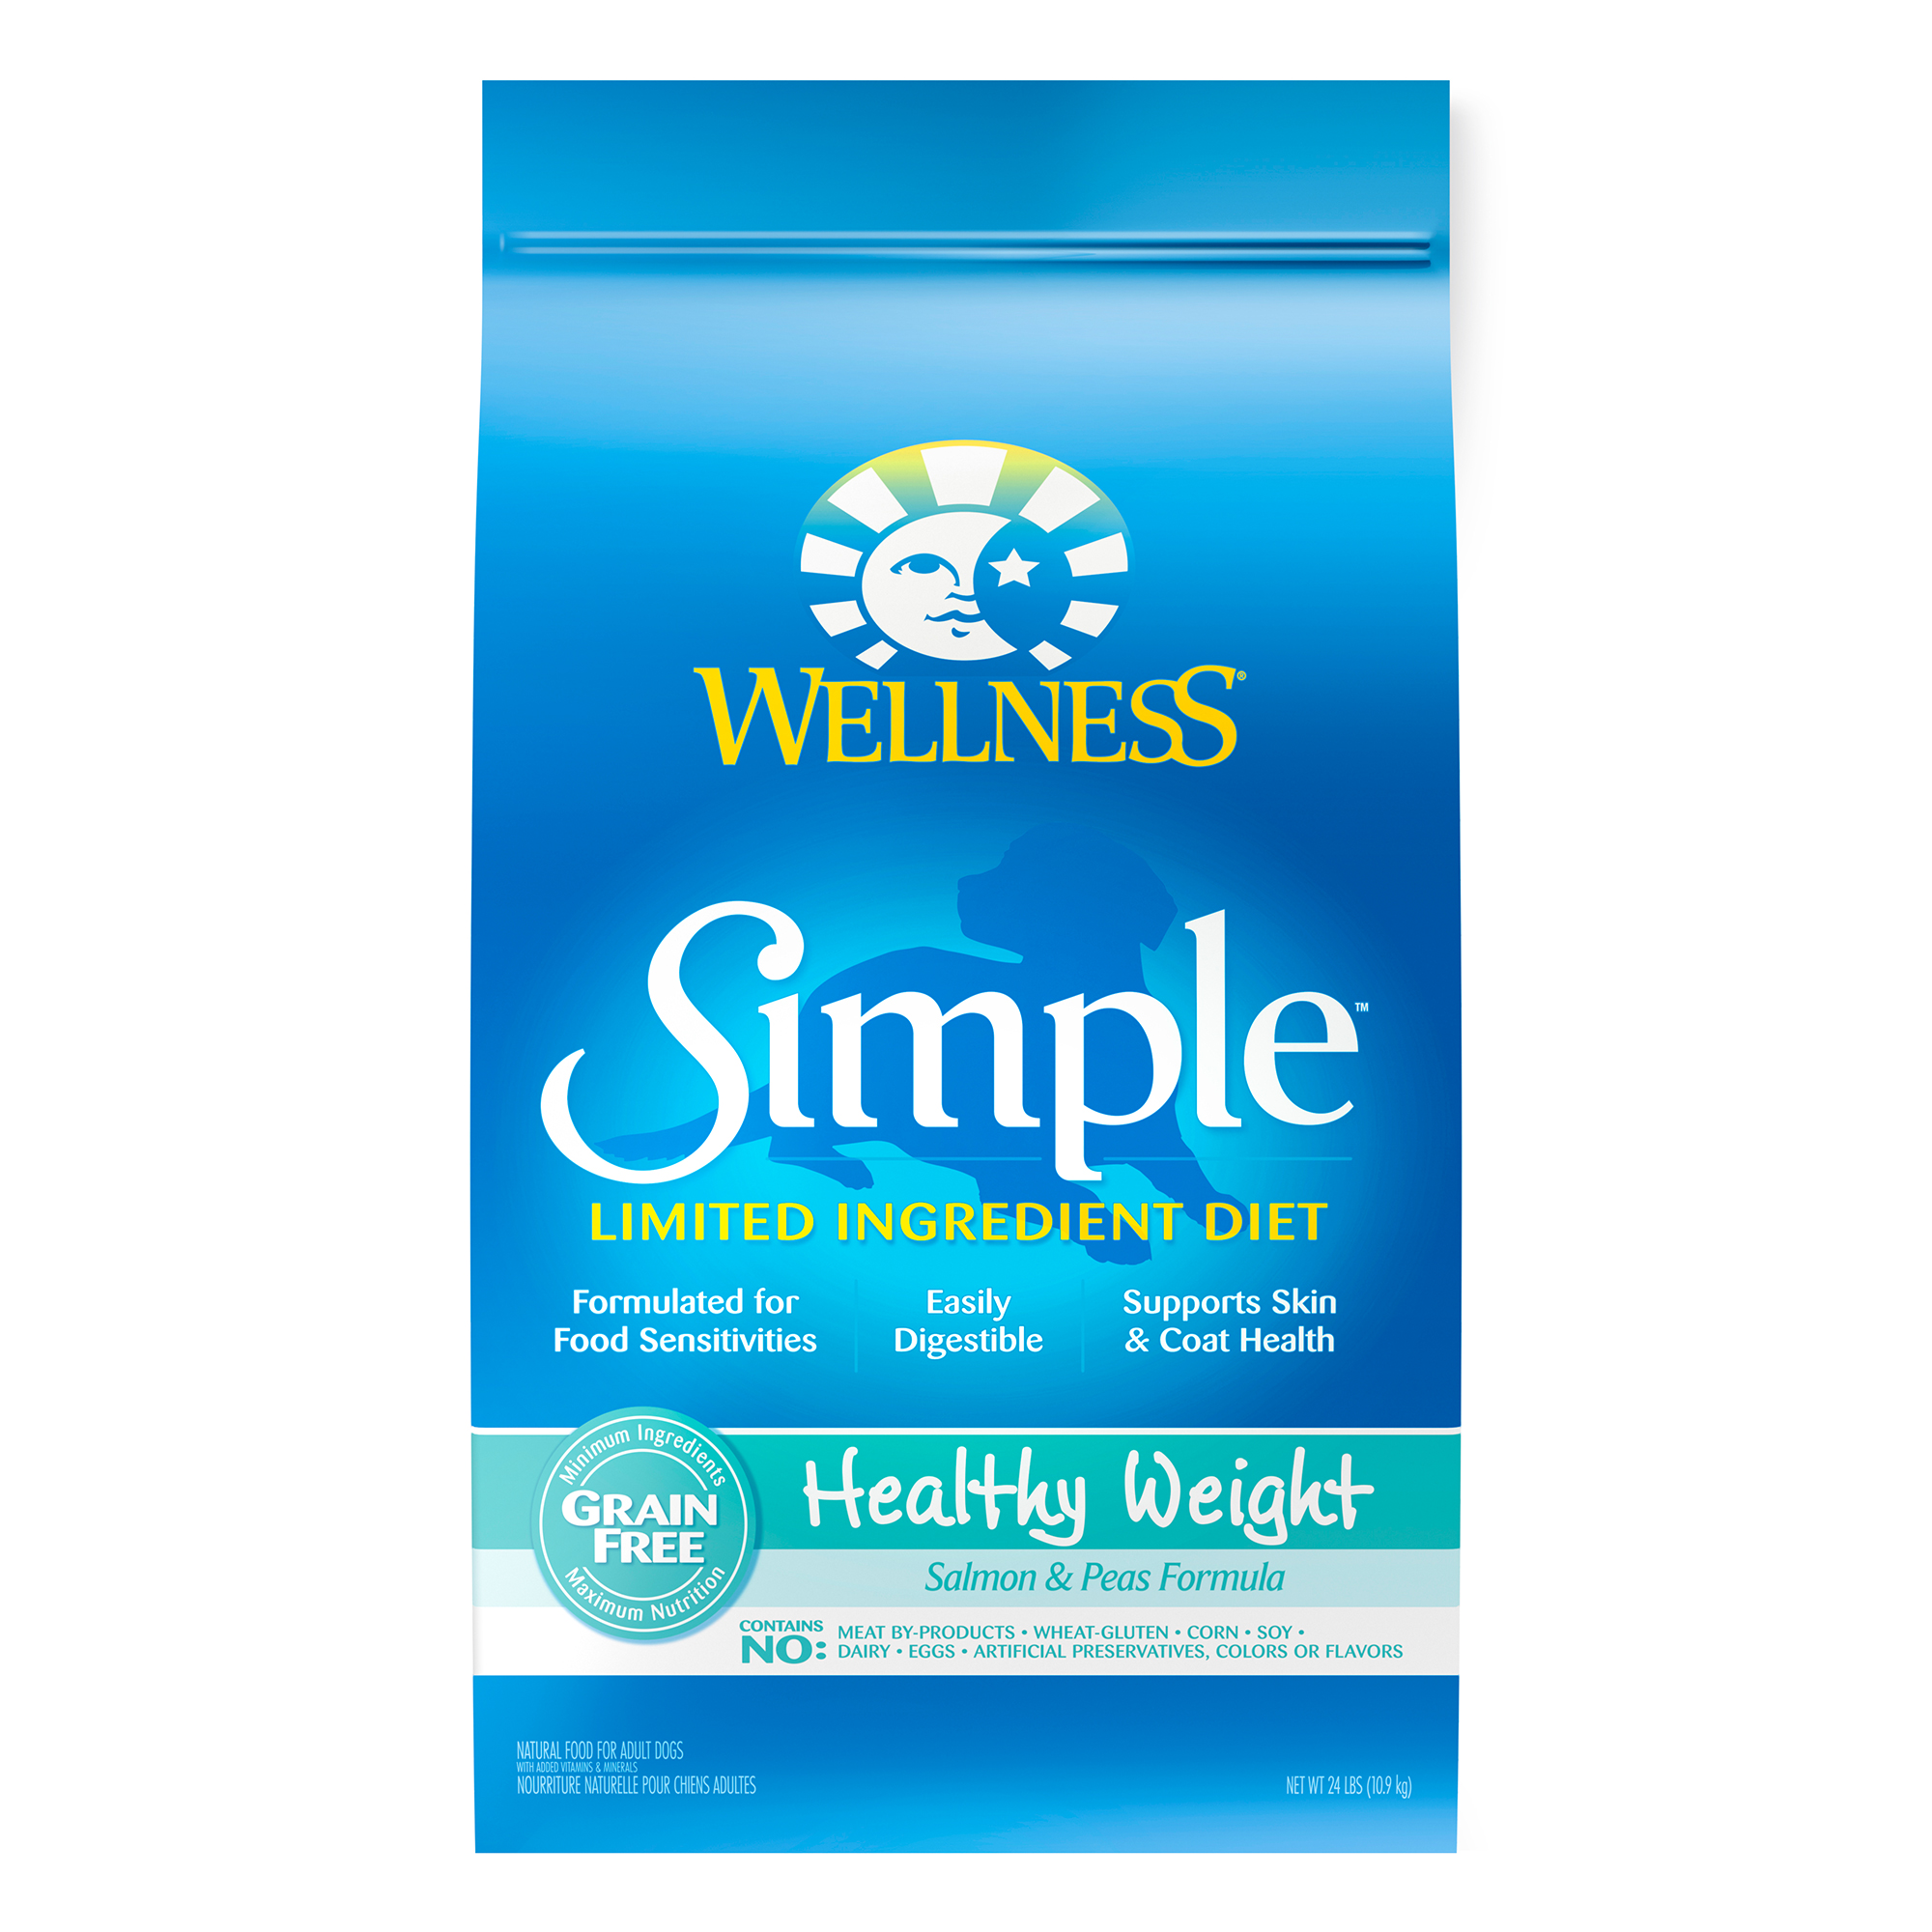 Wellness Simple Natural Grain Free Limited Ingredient Dry Dog Food, Healthy Weight Recipe, 24lb Bag - image 1 of 6